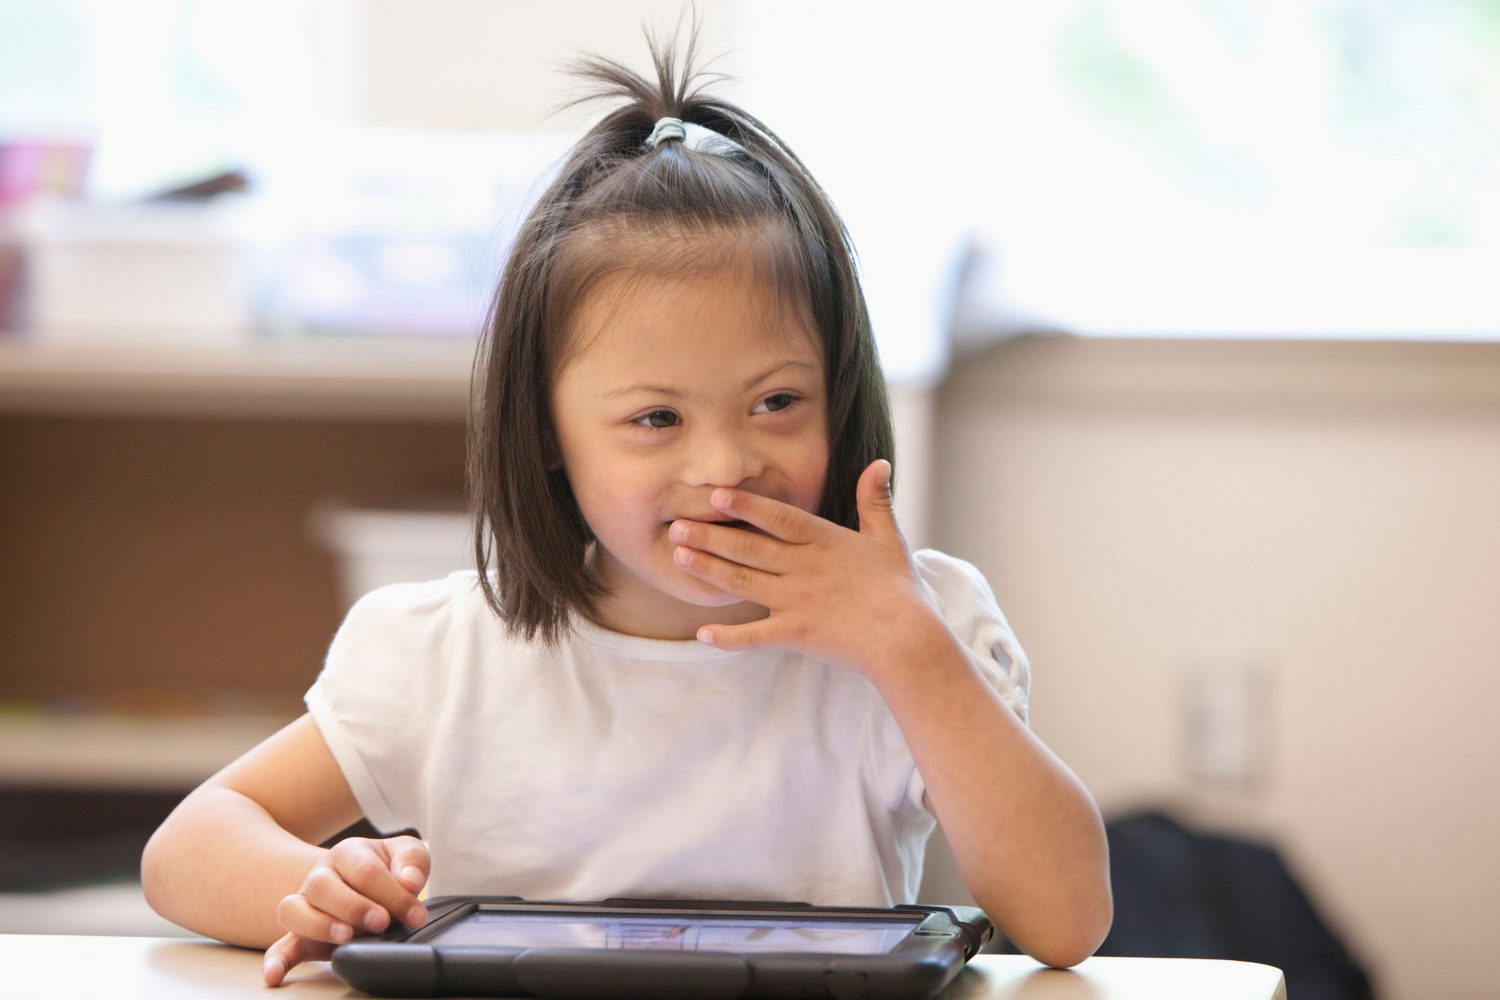 Asian girl with Down syndrome laughs while using a tablet